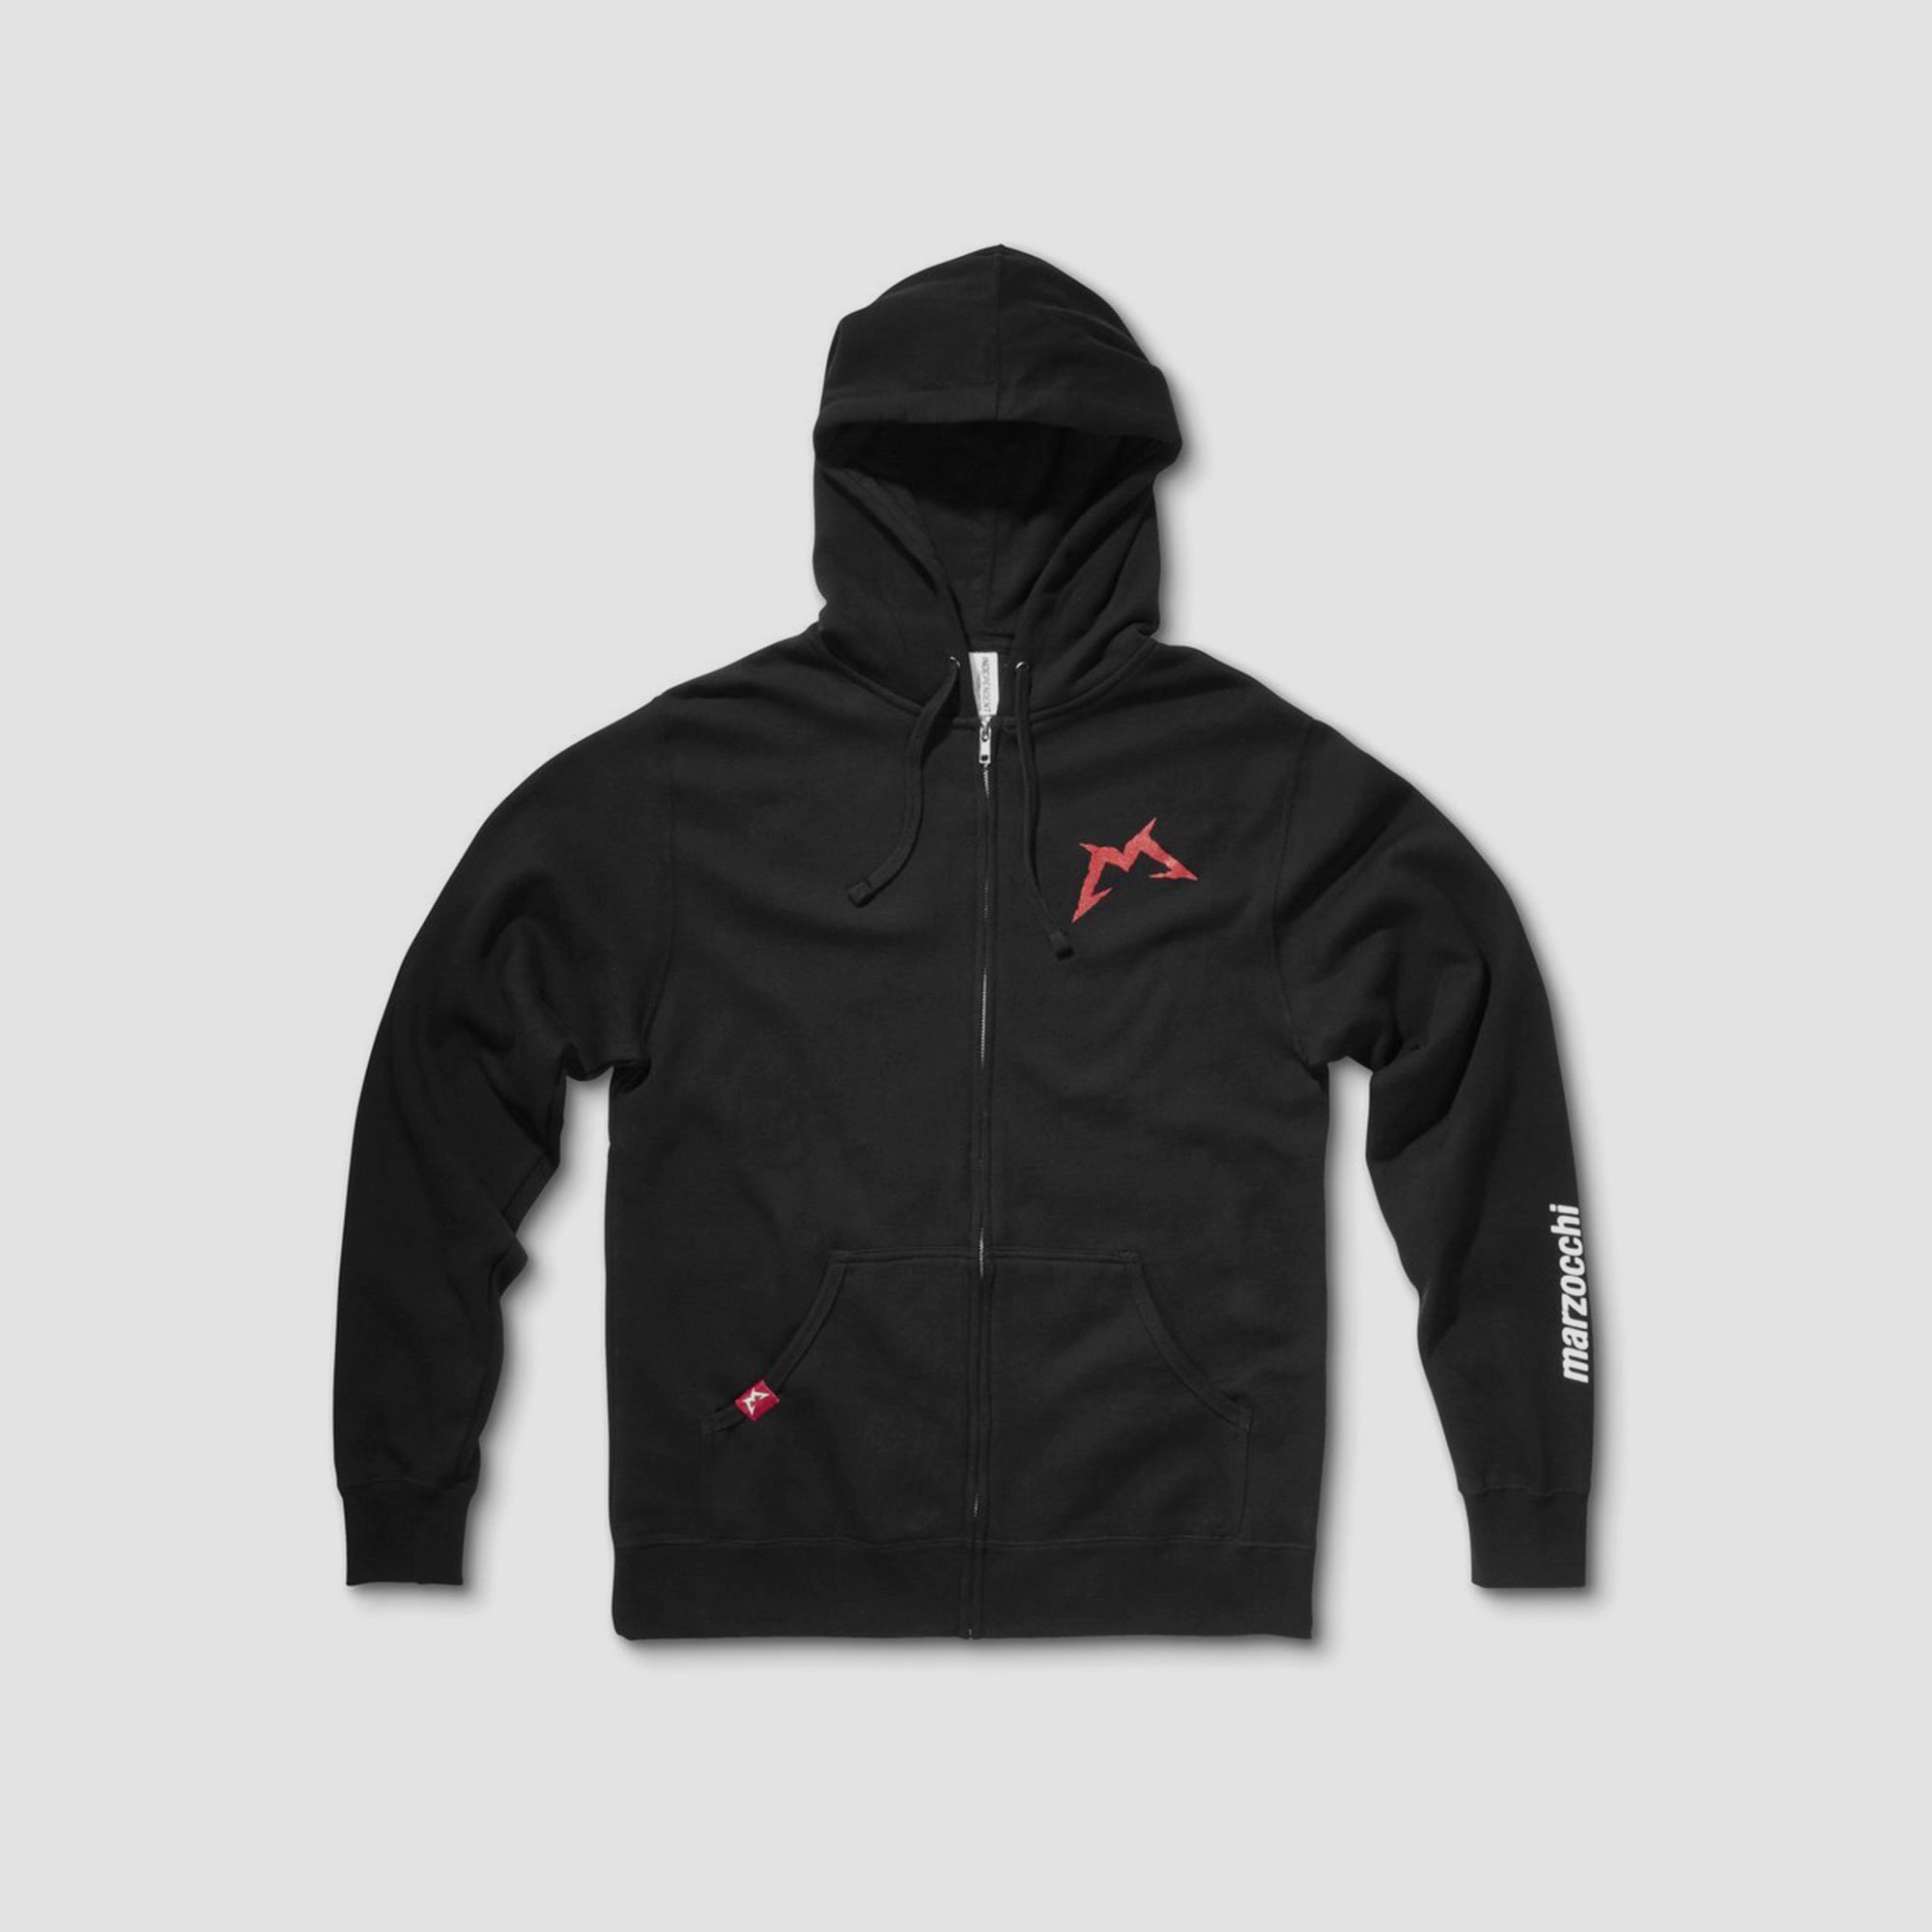 Image of Marzocchi Zip Hoodie